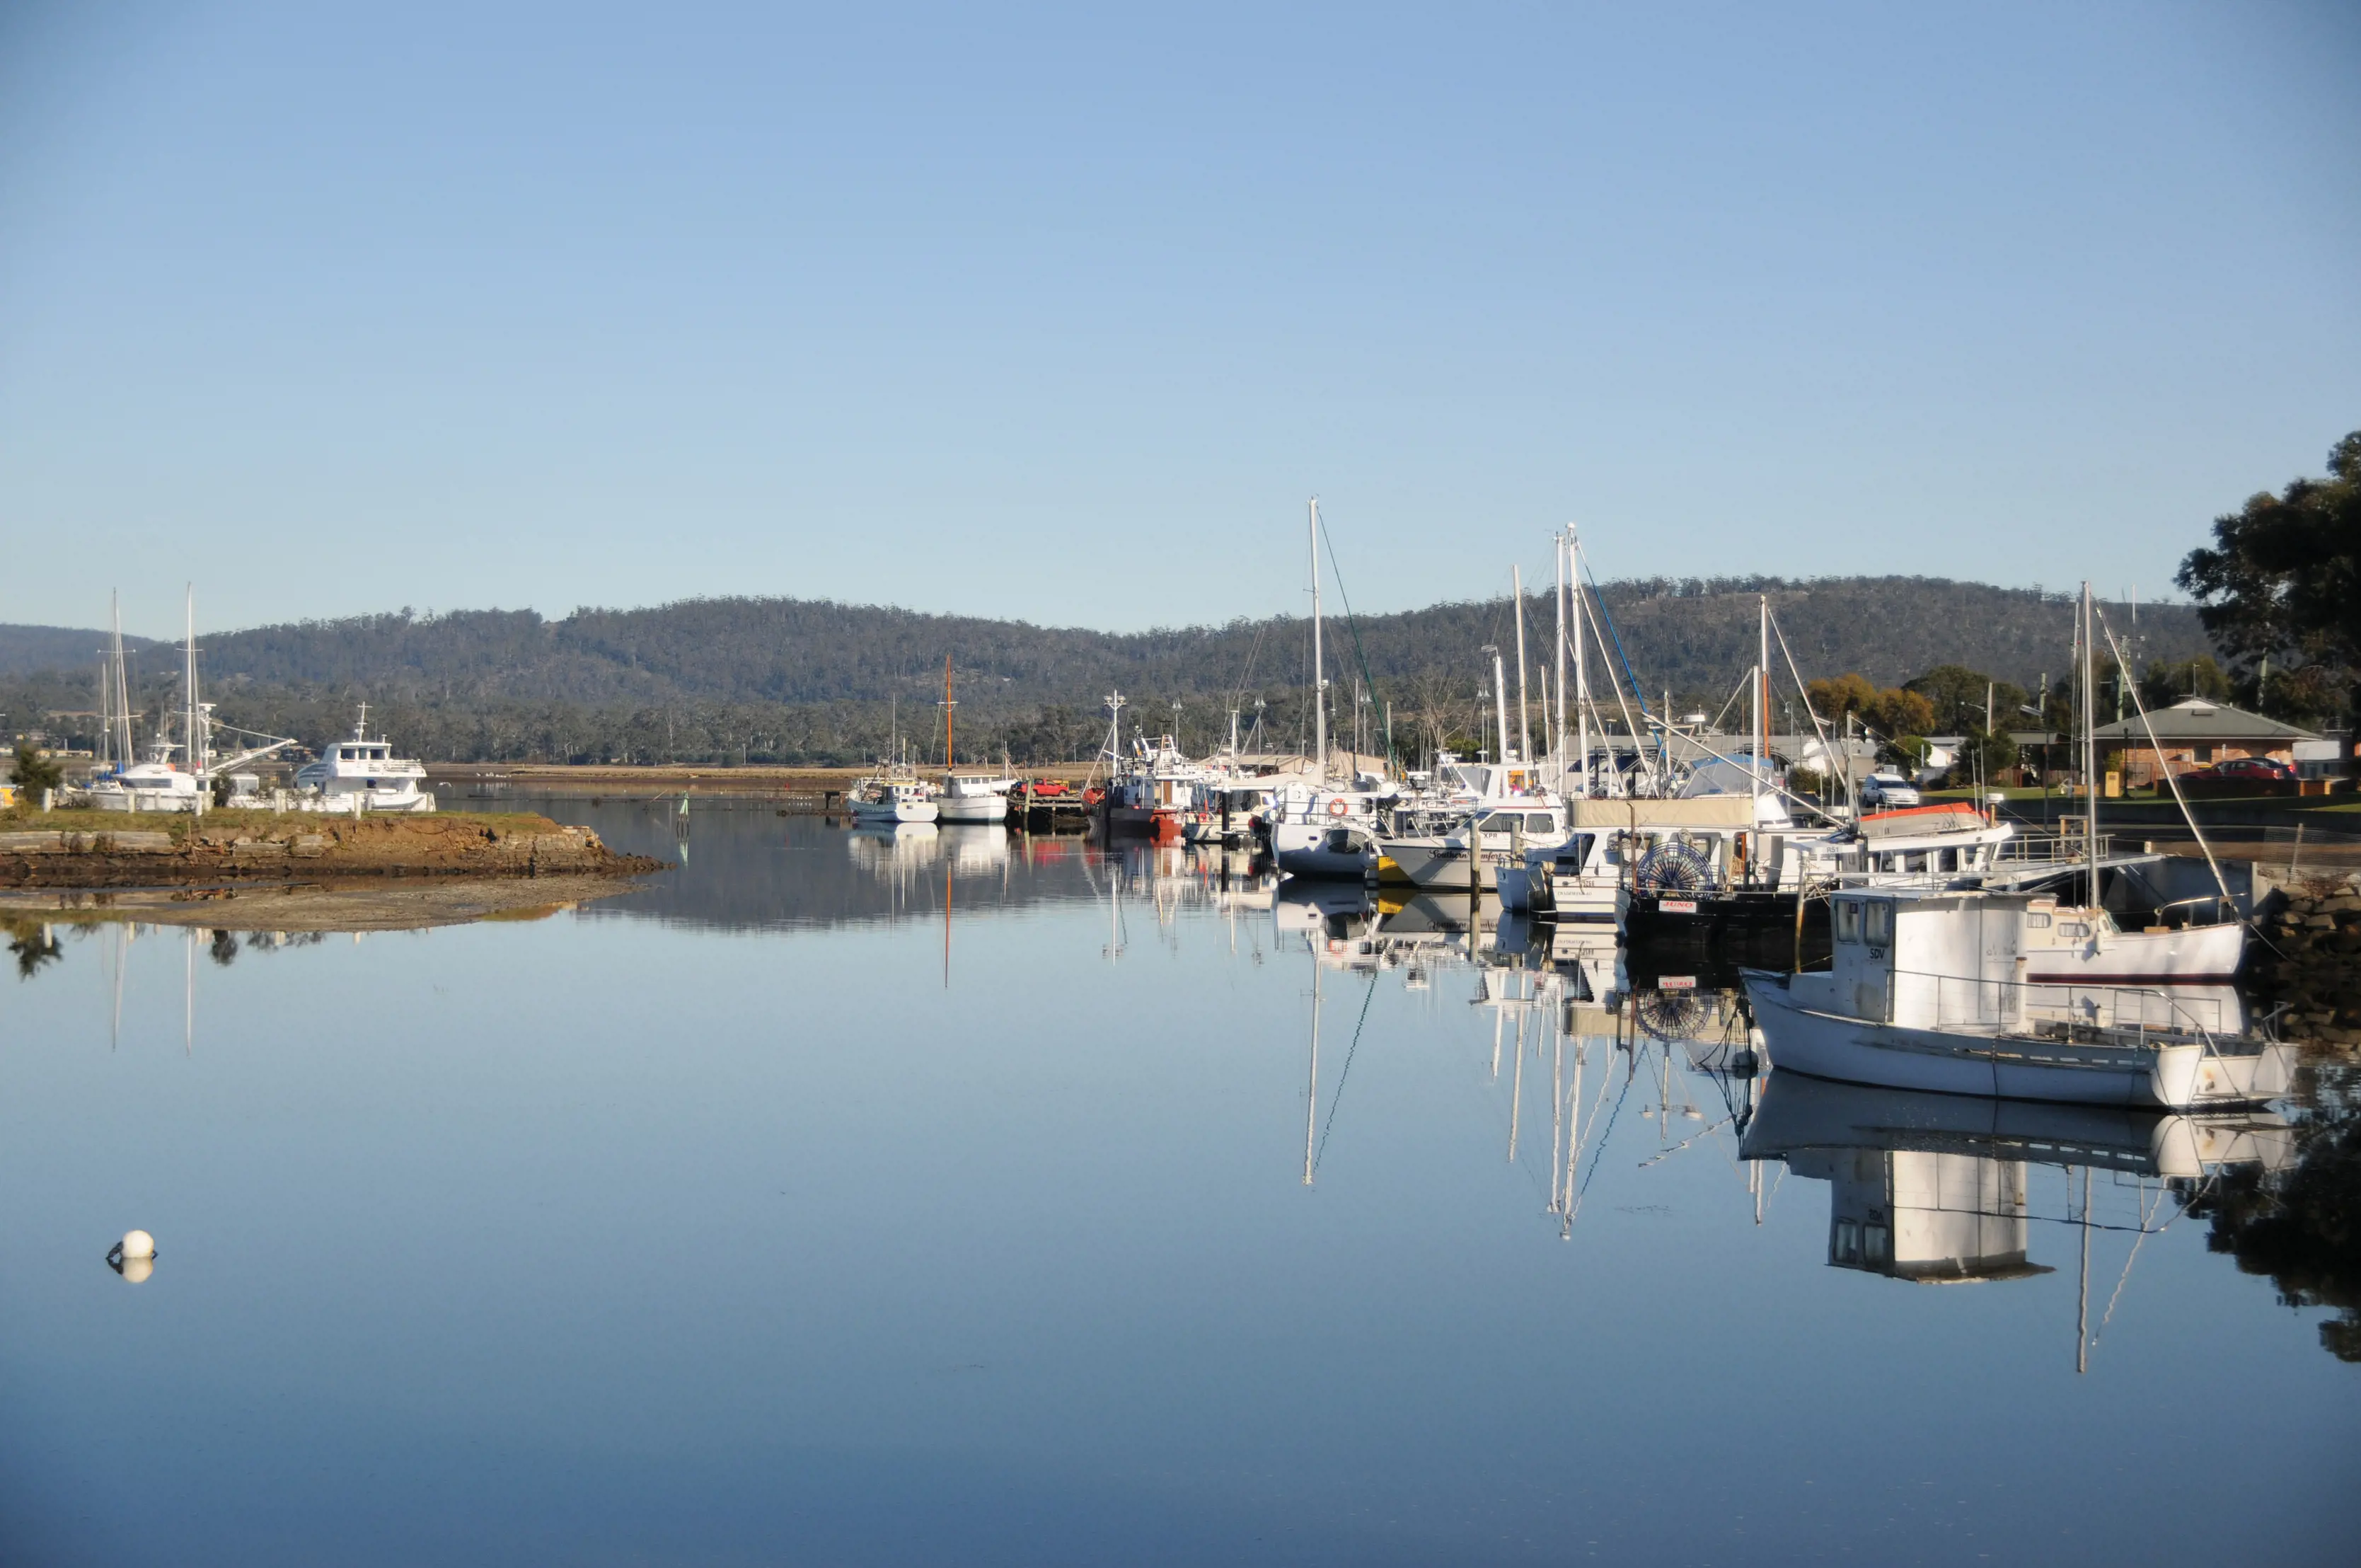 Landscape of boats parked up at Triabunna waterfront.